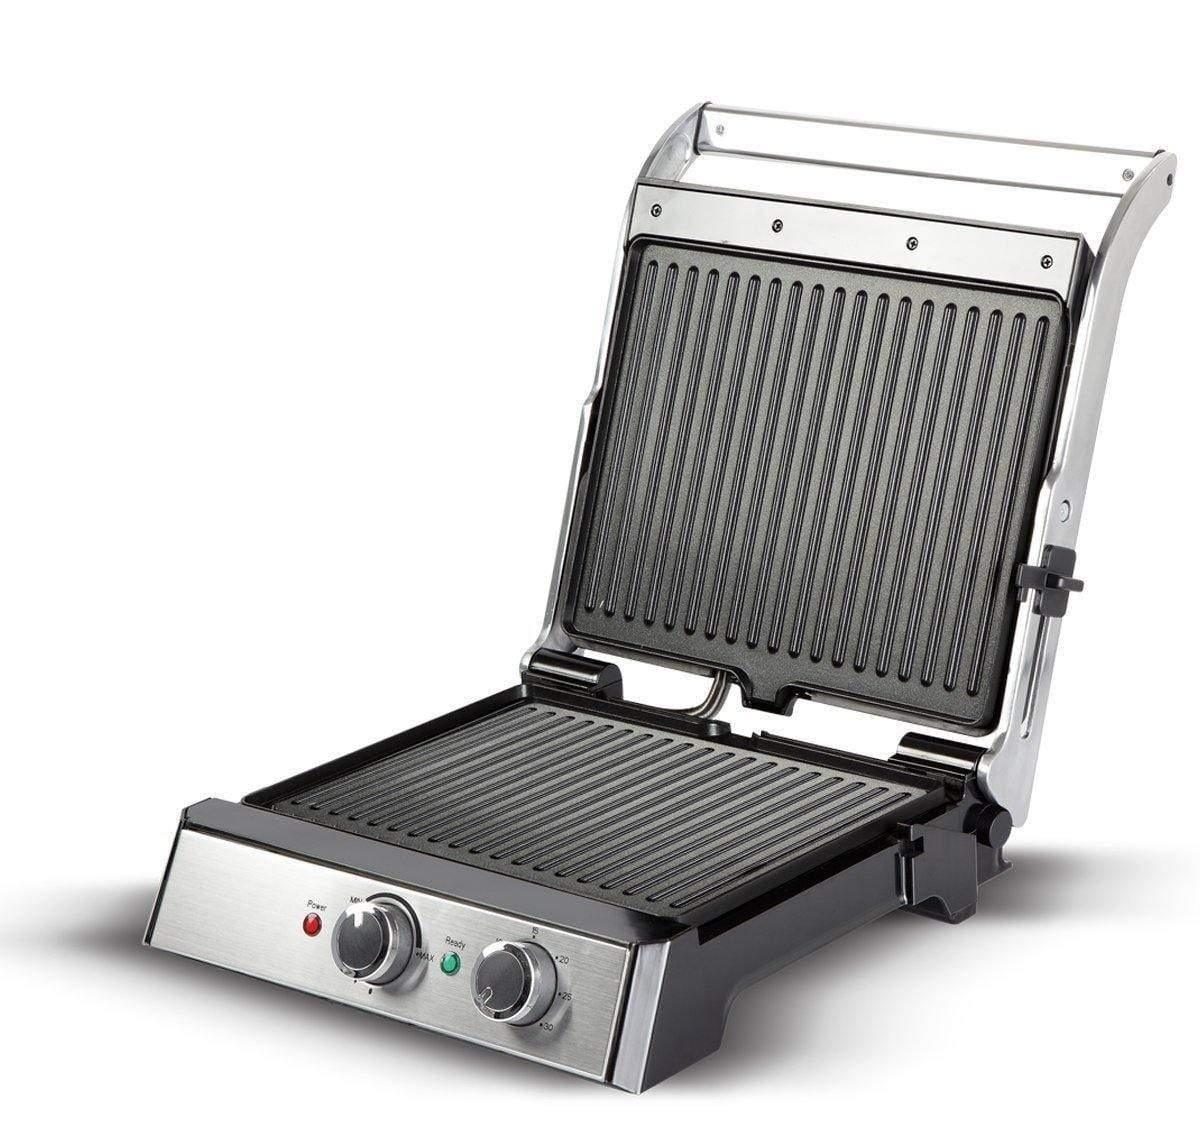 HAVELLS TOASTINO 4 SLICE GRILL AND BBQ WITH TIMER-Home & Kitchen Appliances-dealsplant